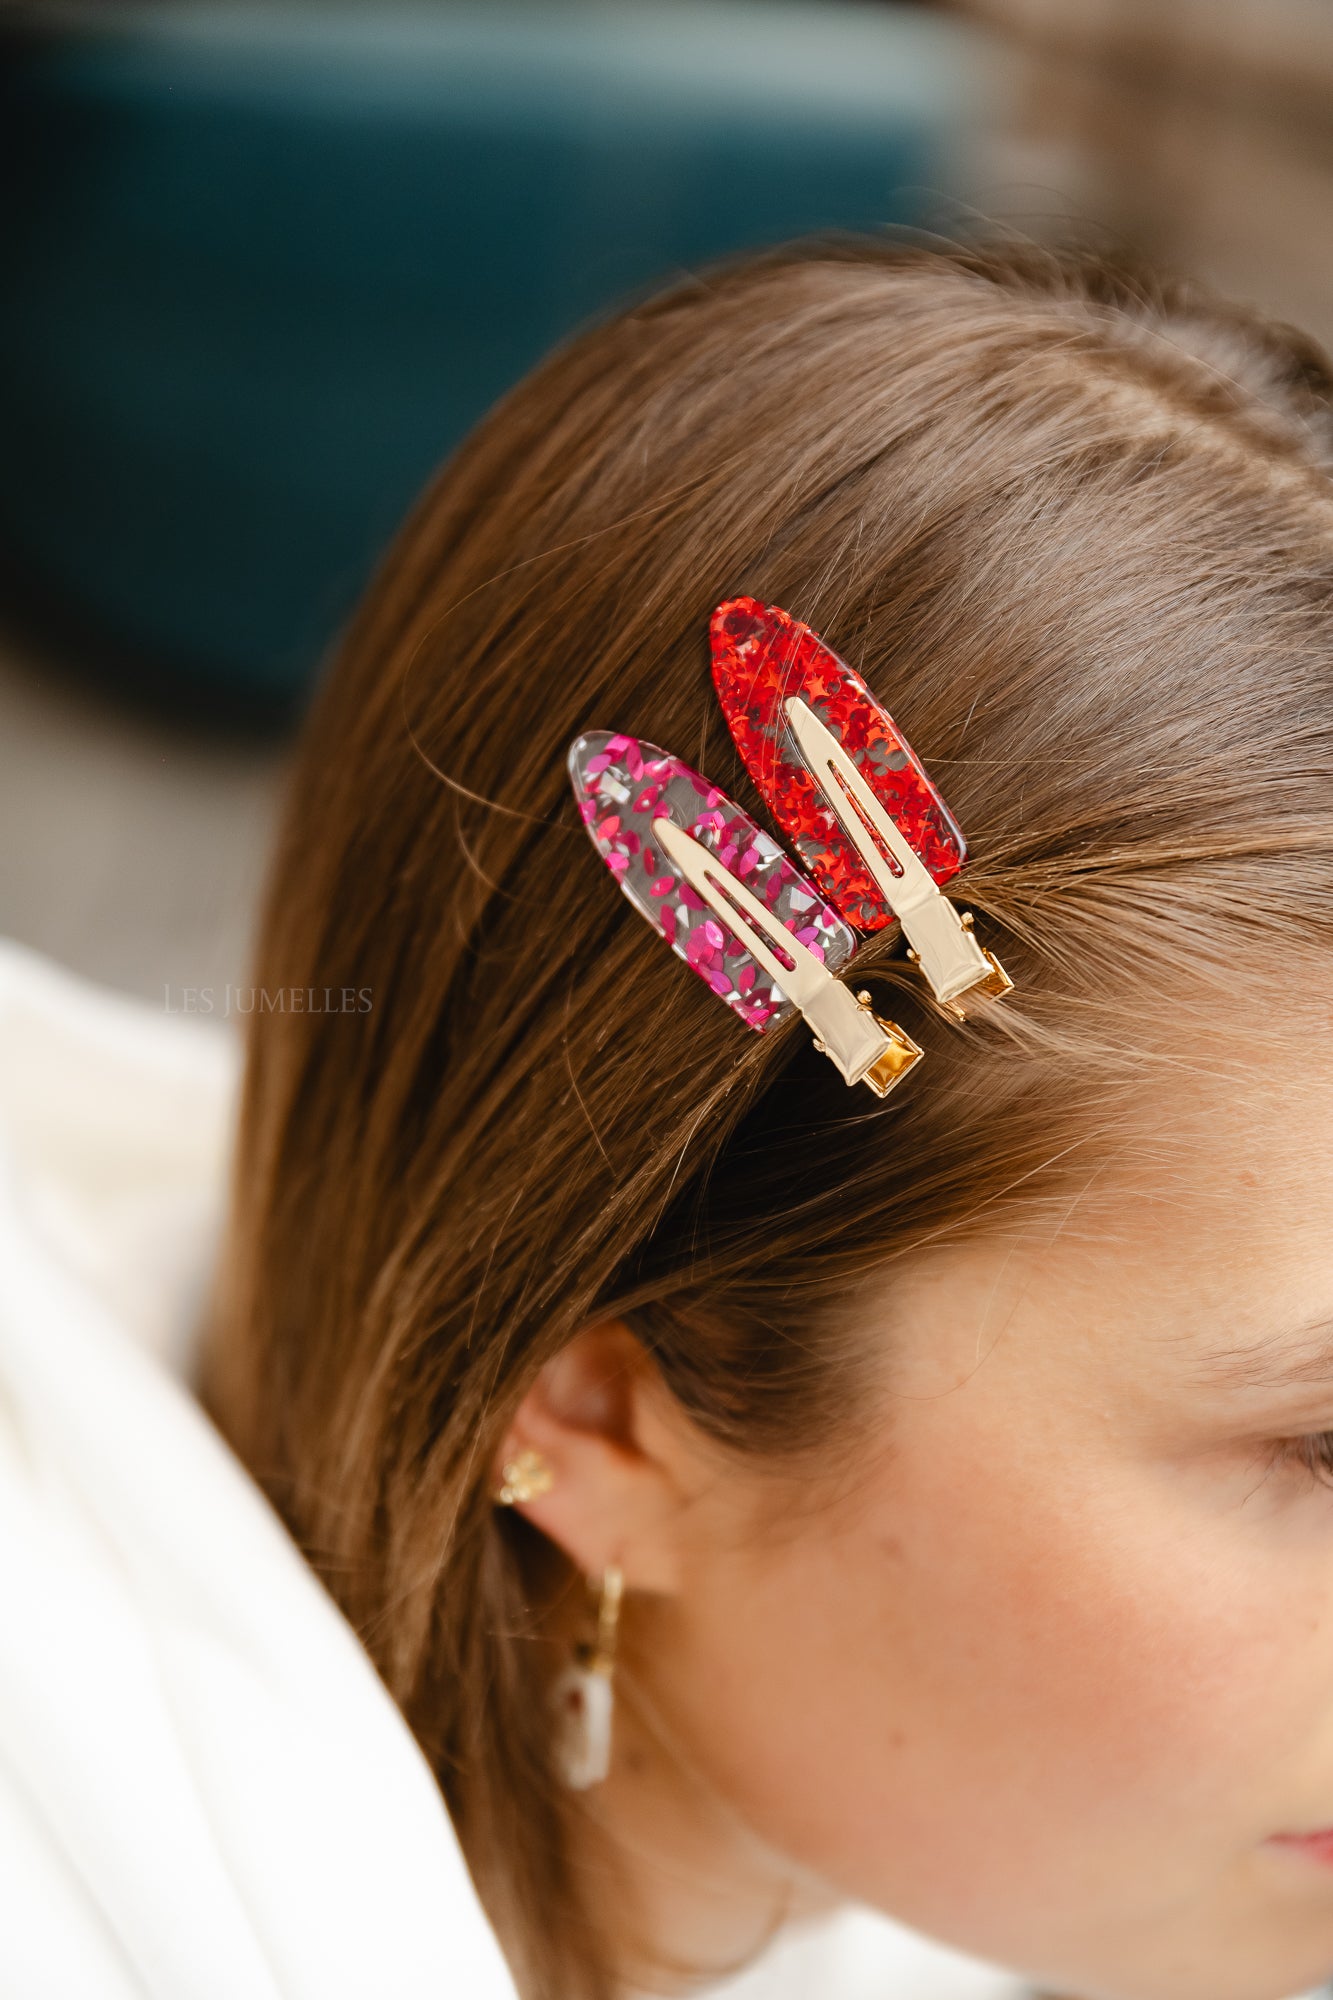 Our wide range of hair accessories to style your hair – Les Jumelles